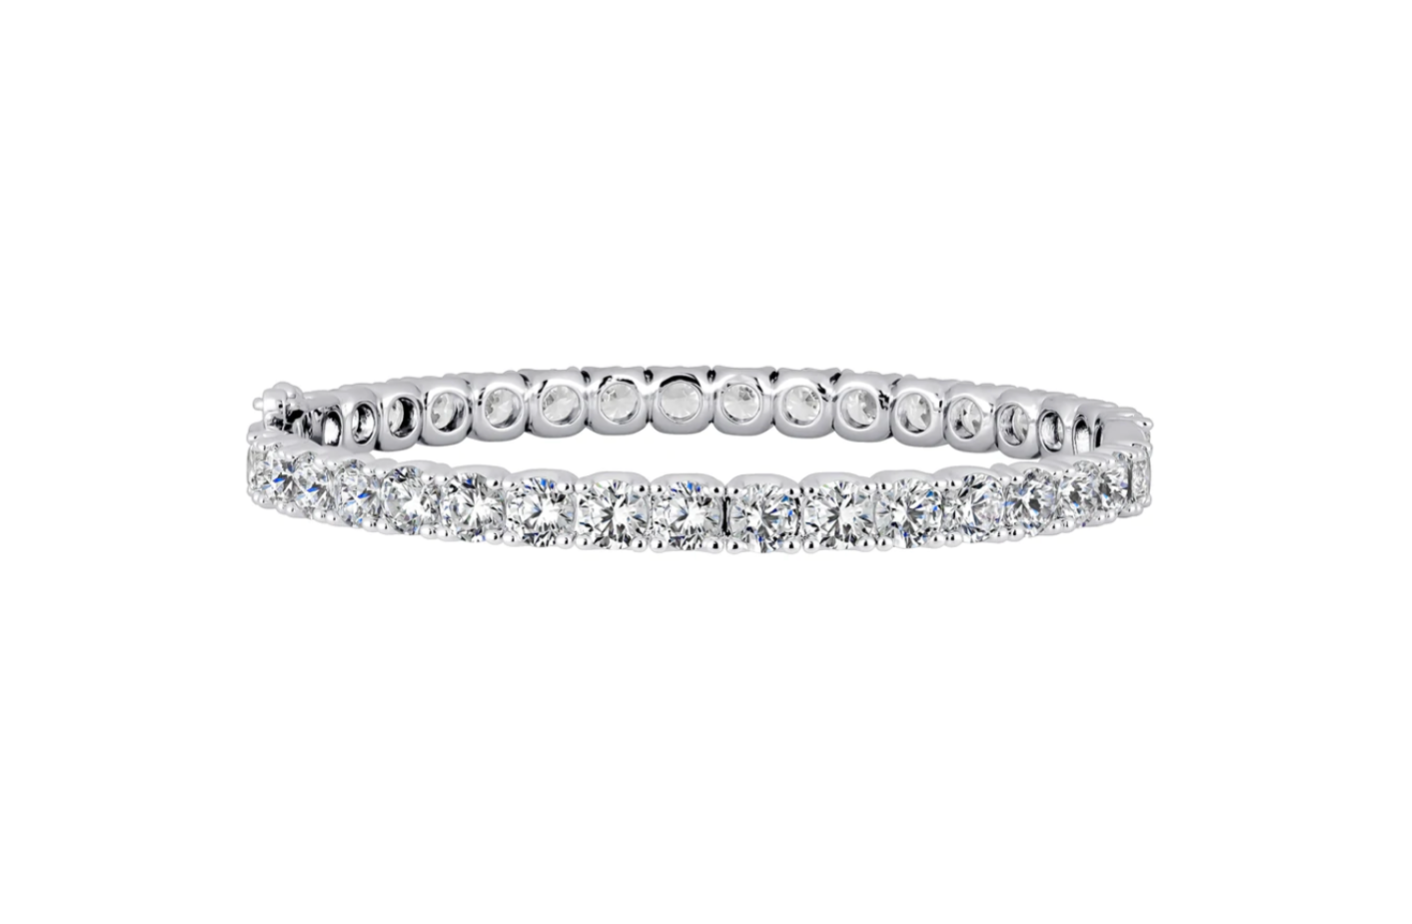 8.2mm x 3.5mm 14k White Gold Tennis Bracelet Tongue for Clasp - Wellness  Marketer Jewelry